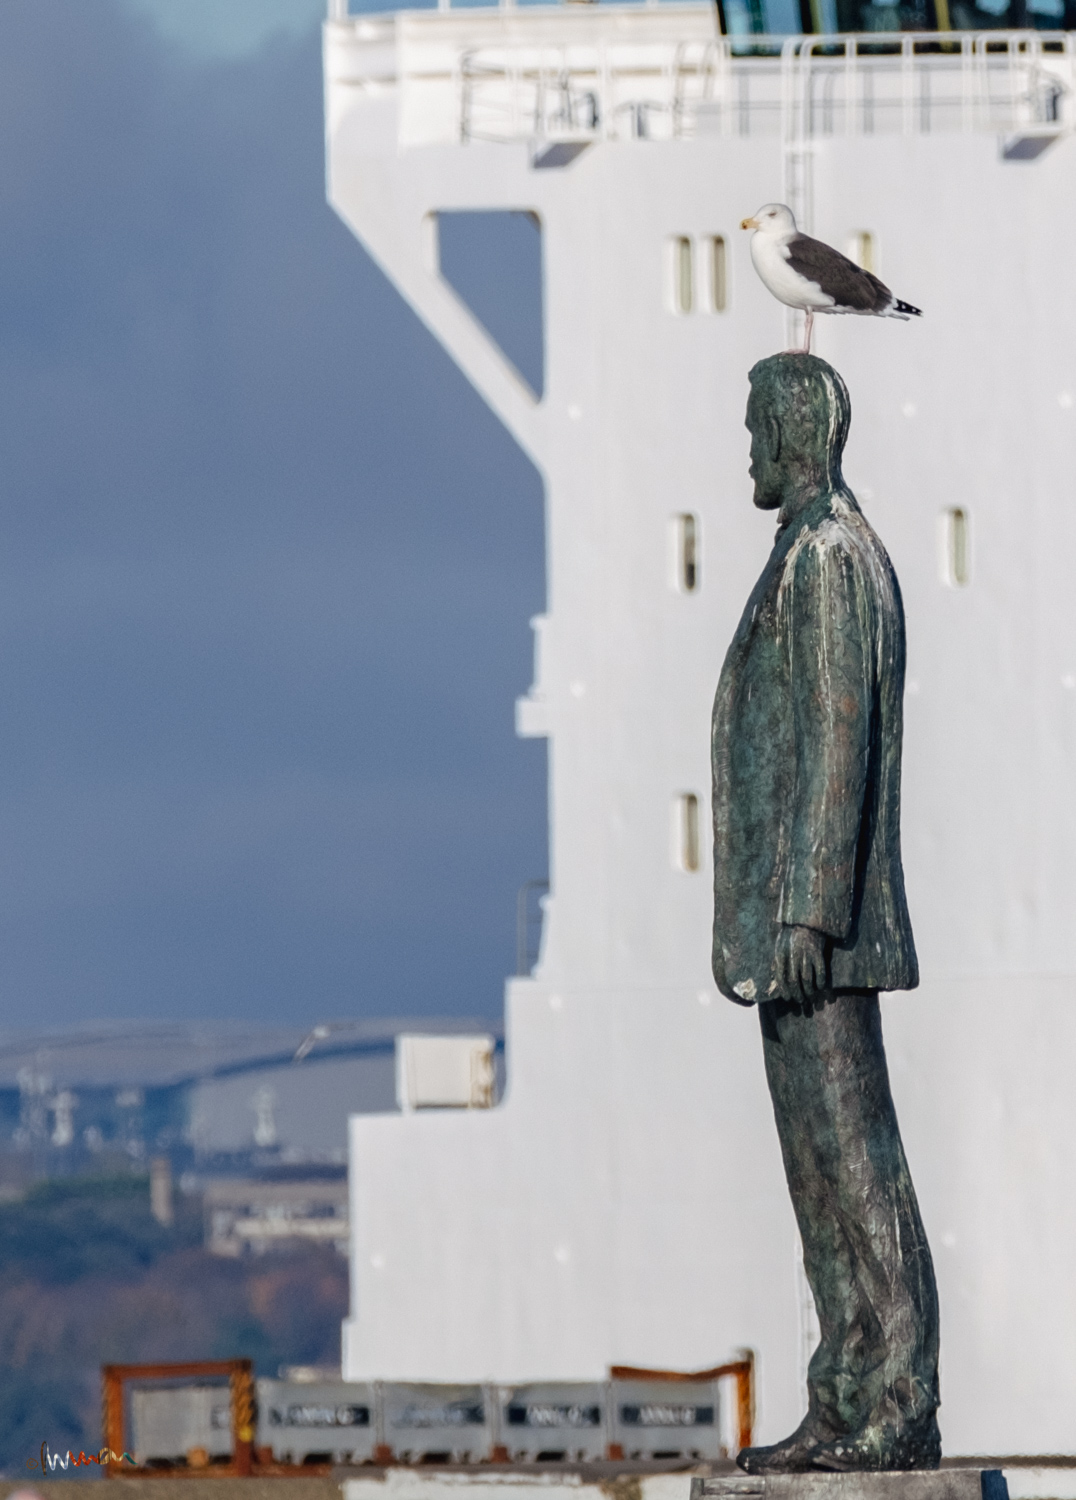 Roger Casement Statue by sculptor Mark Richards FRSS, placed on the Dún Laoghaire foreshore in 2021. The ship sailed, the gull took to the air. The statue stands tall, draped with bird lime. (Sir) Roger himself was hanged and buried in a lime pit.